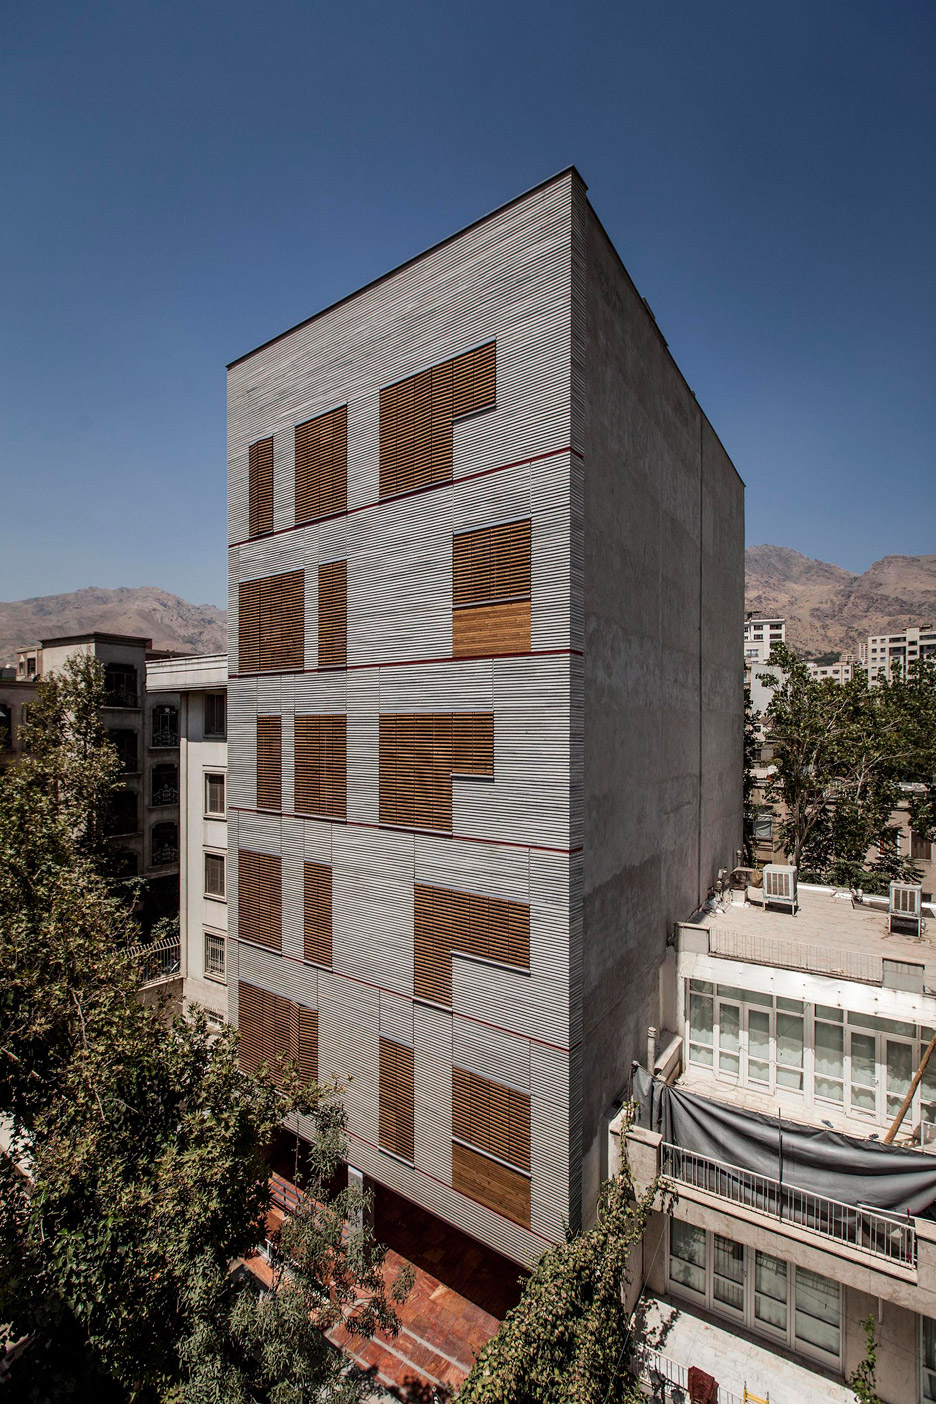 Ayeneh Office Gives Tehran Apartments A Textured Facade With Ridged Granite And Slatted Timber